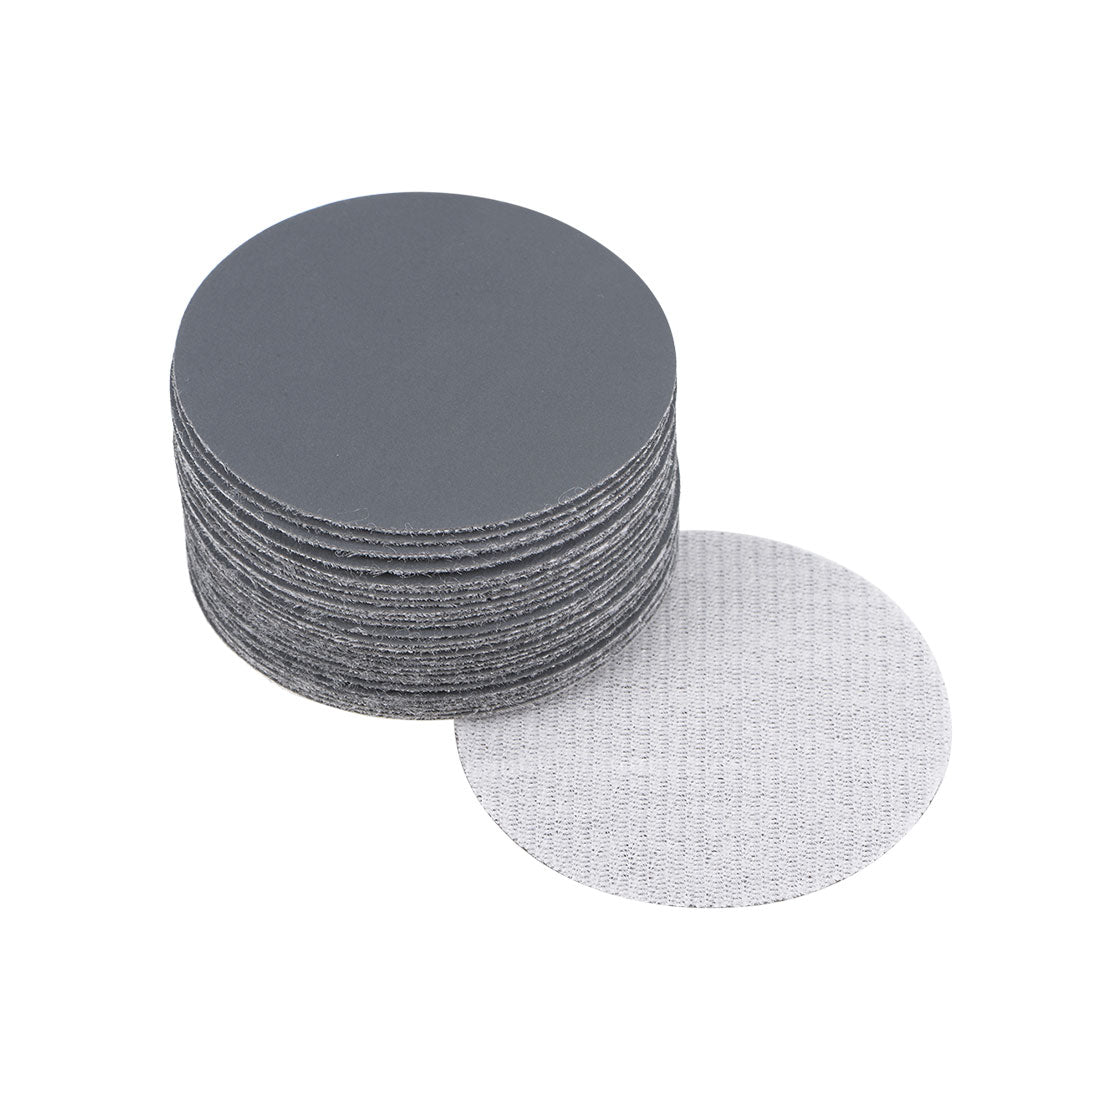 Uxcell Uxcell 2 inch Wet Dry Disc 5000 Grit Hook and Loop Sanding Disc Silicon Carbide 30pcs